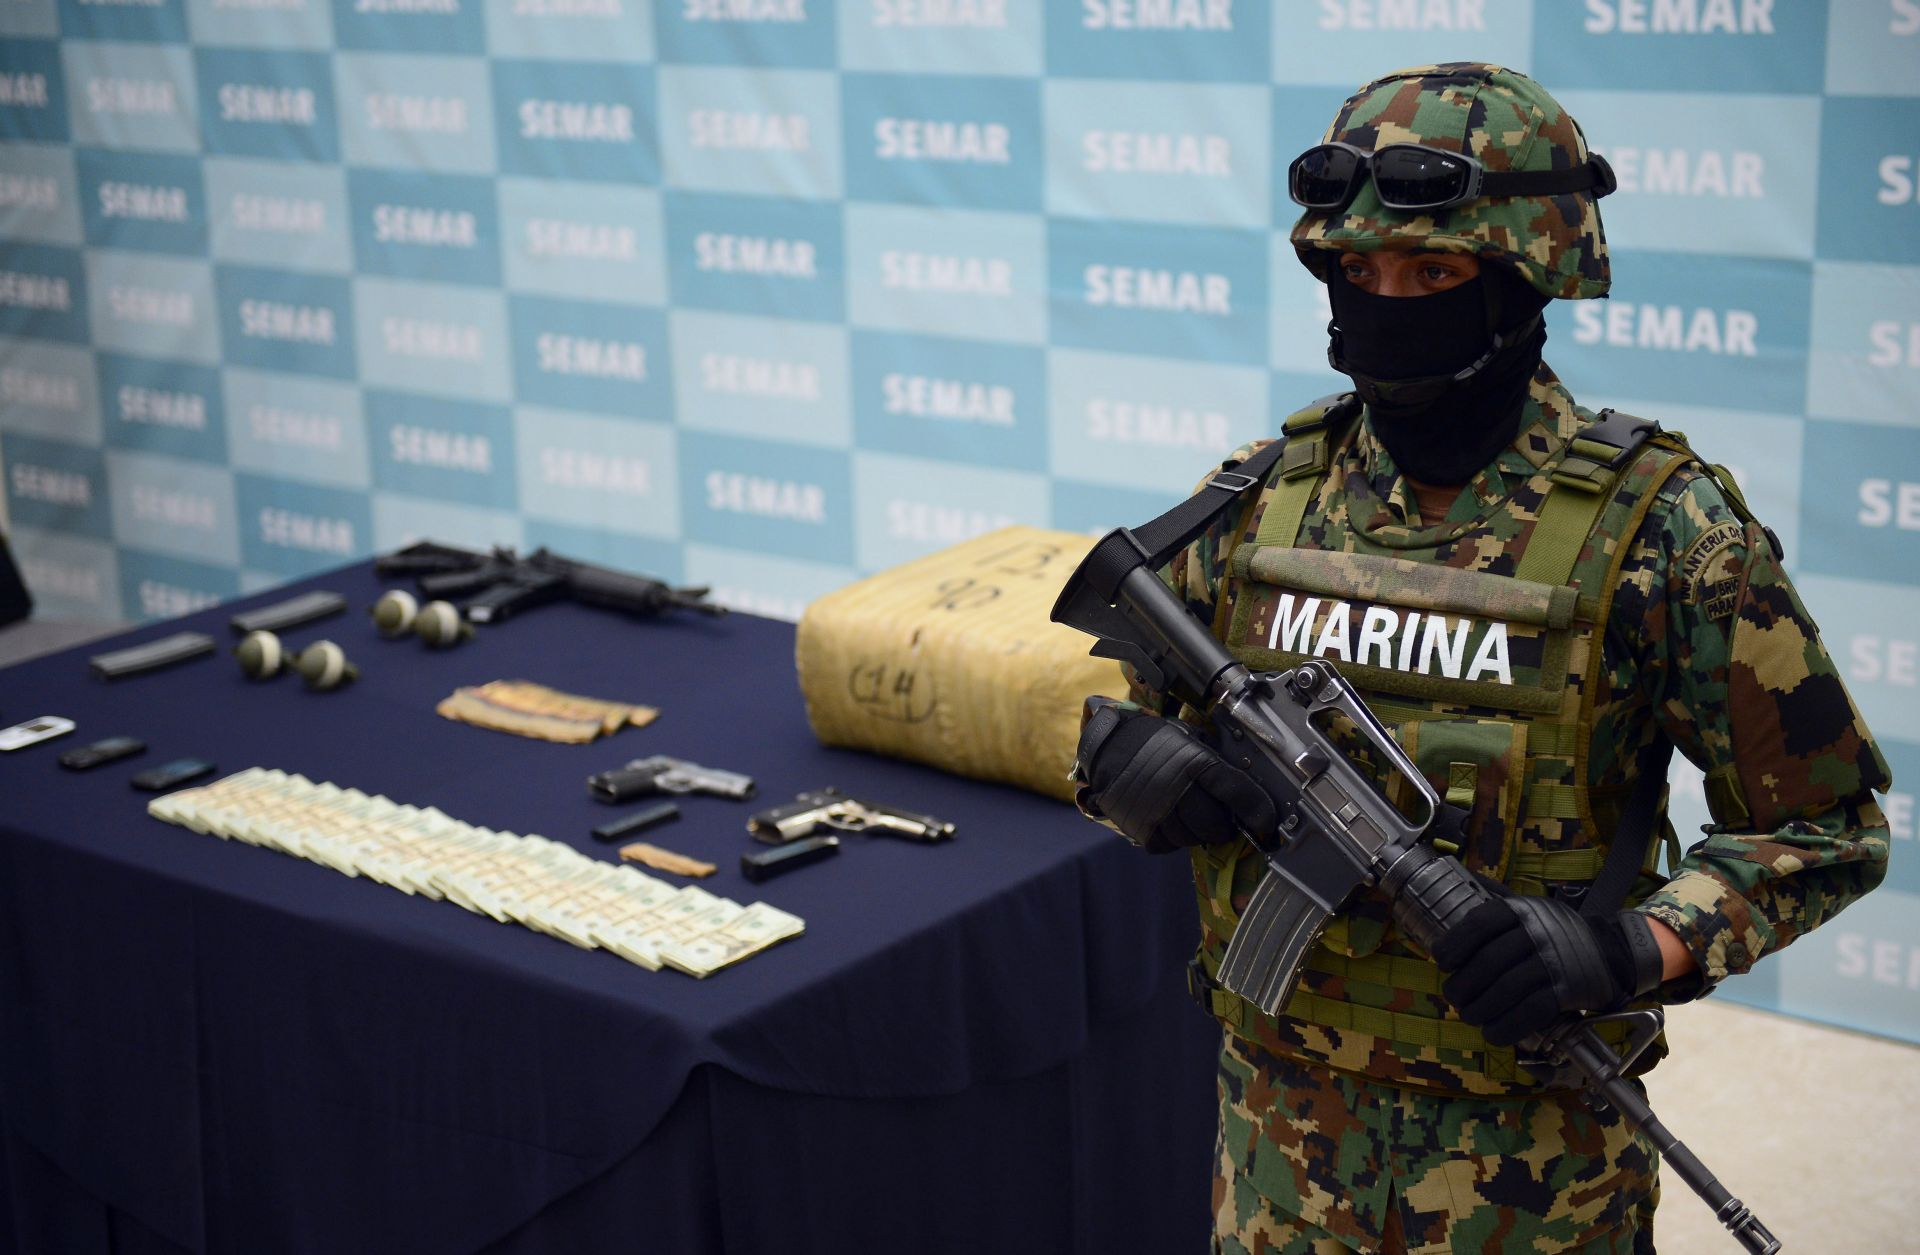 A soldier guards firearms, hand grenades and other illegal items seized from the Zeta drug cartel.